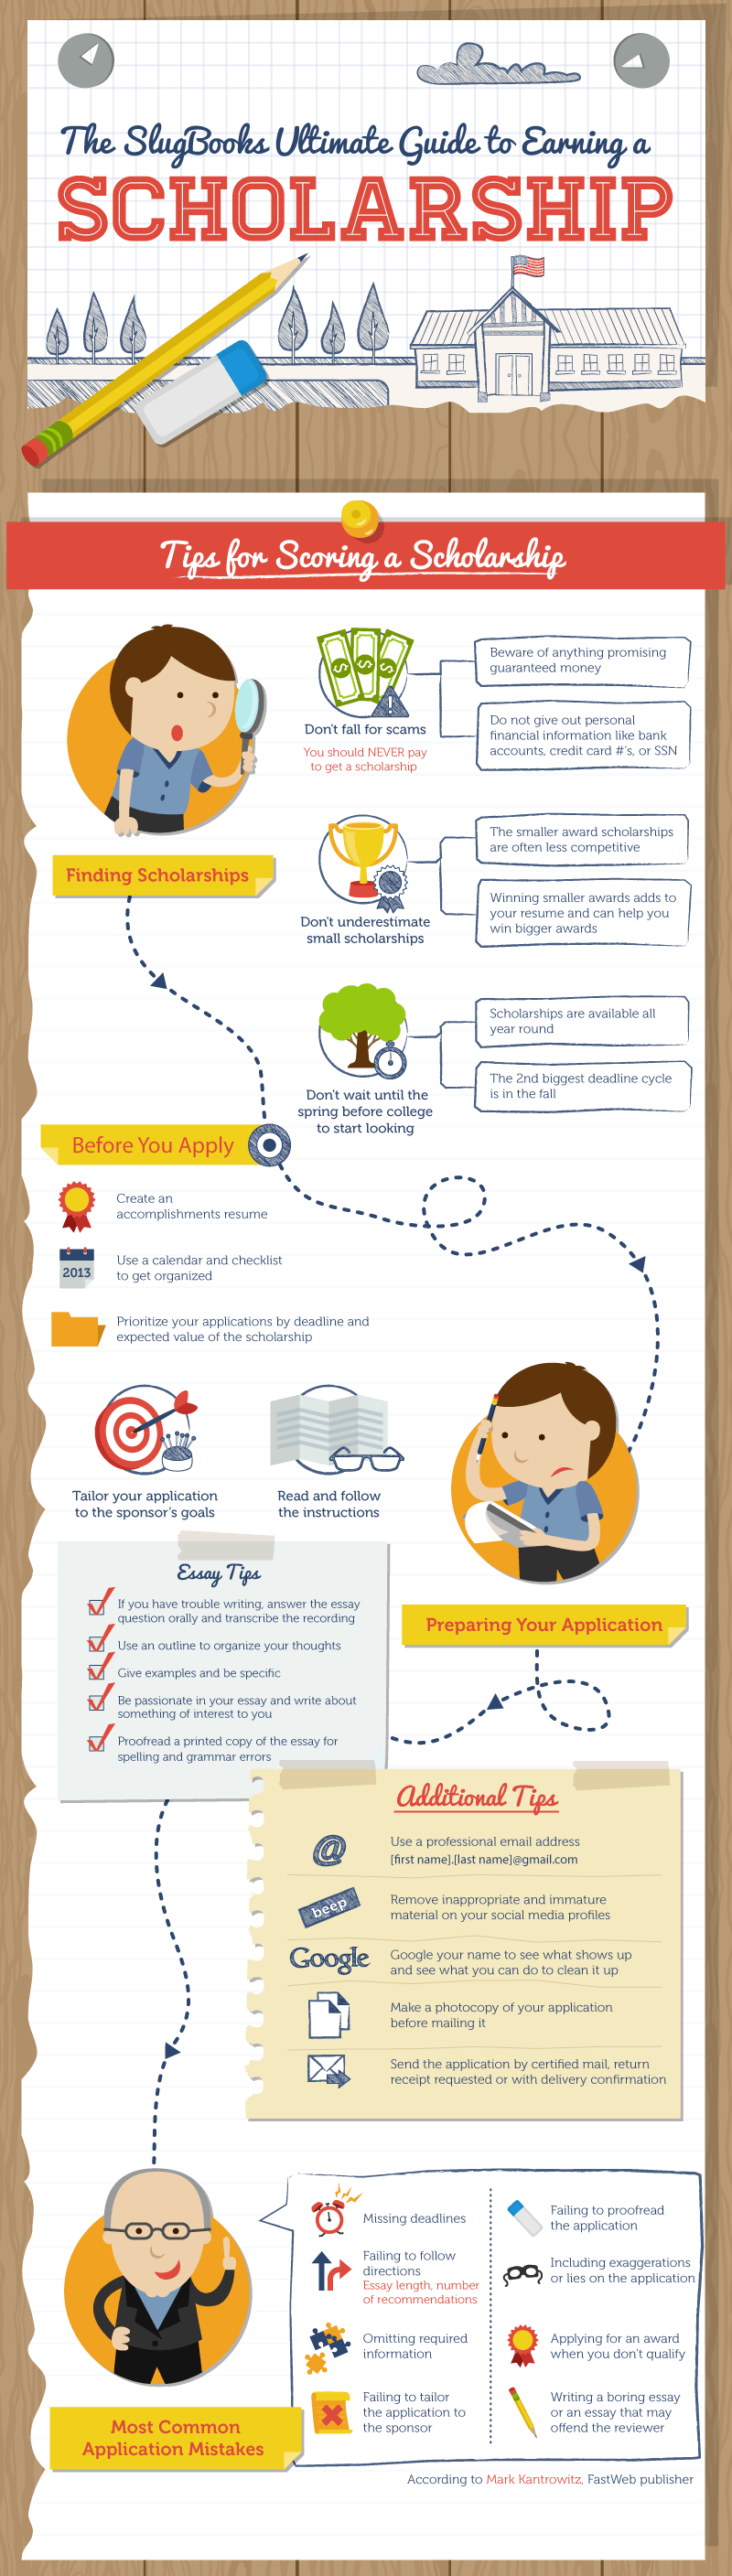 The-Ultimate-Guide-to-Earning-a-Scholarship-infographic